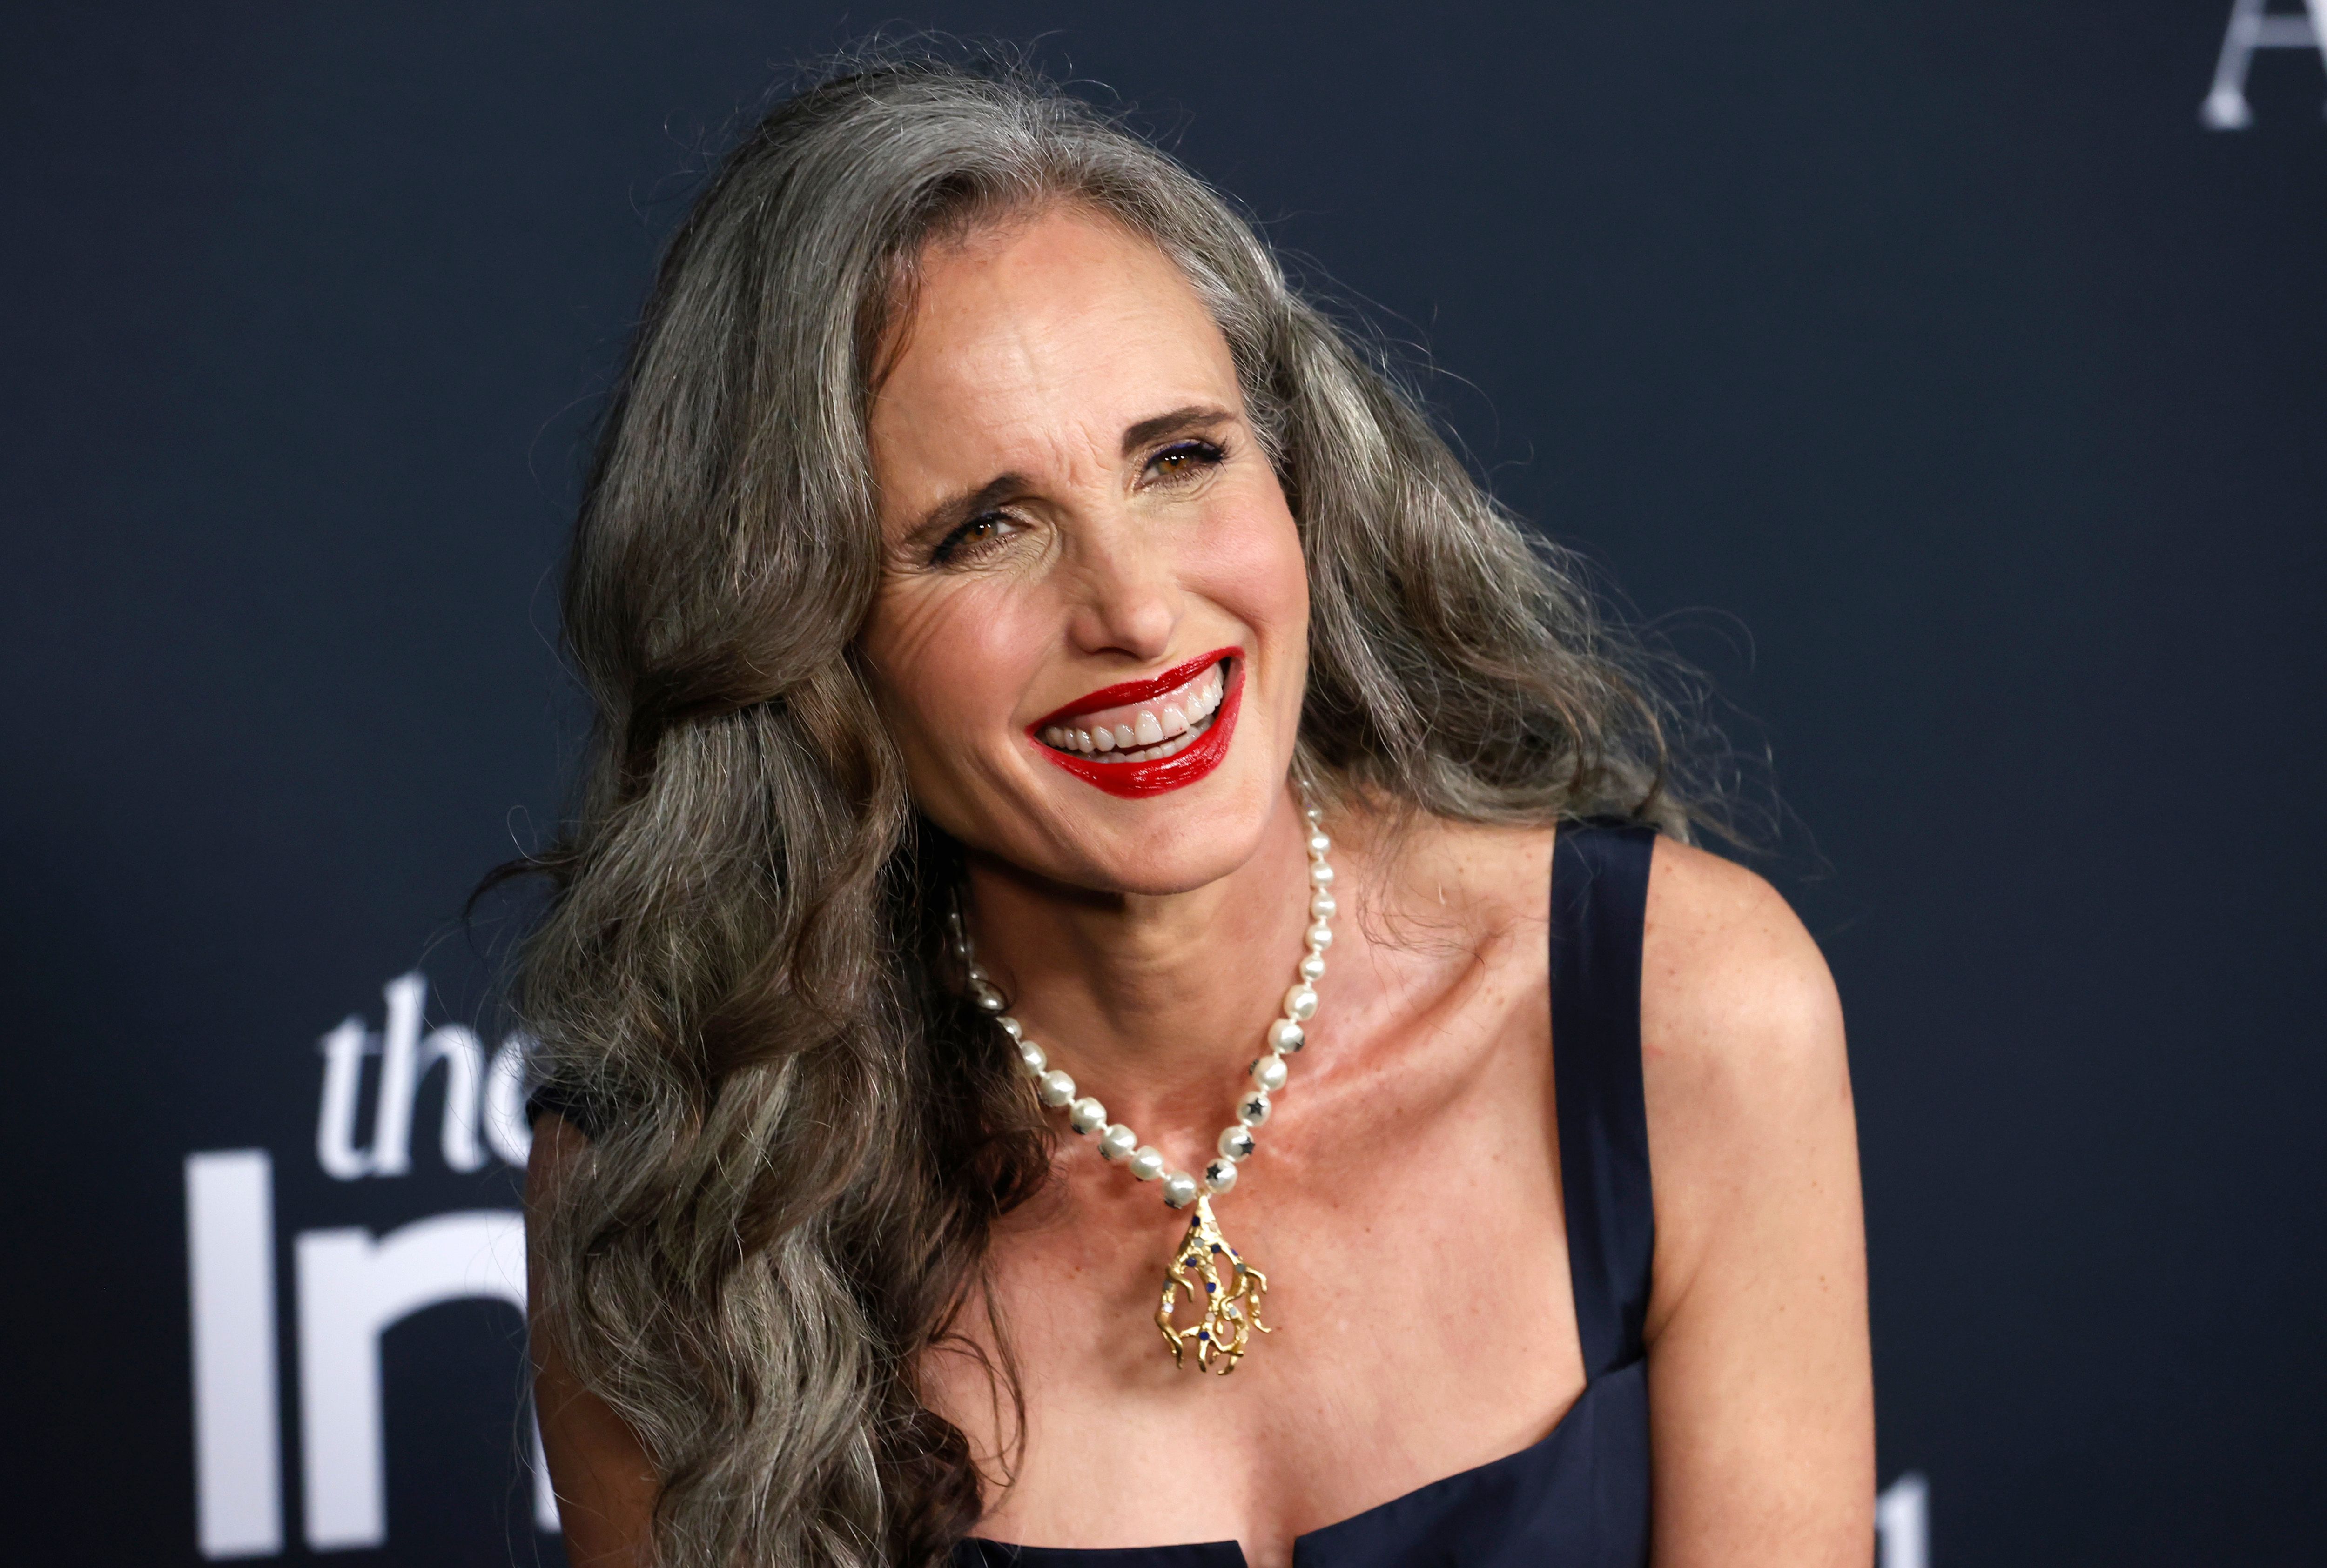 Andie MacDowell attending the 6th Annual InStyle Awards on November 15, 2021 in Los Angeles, California. | Source: Getty Images